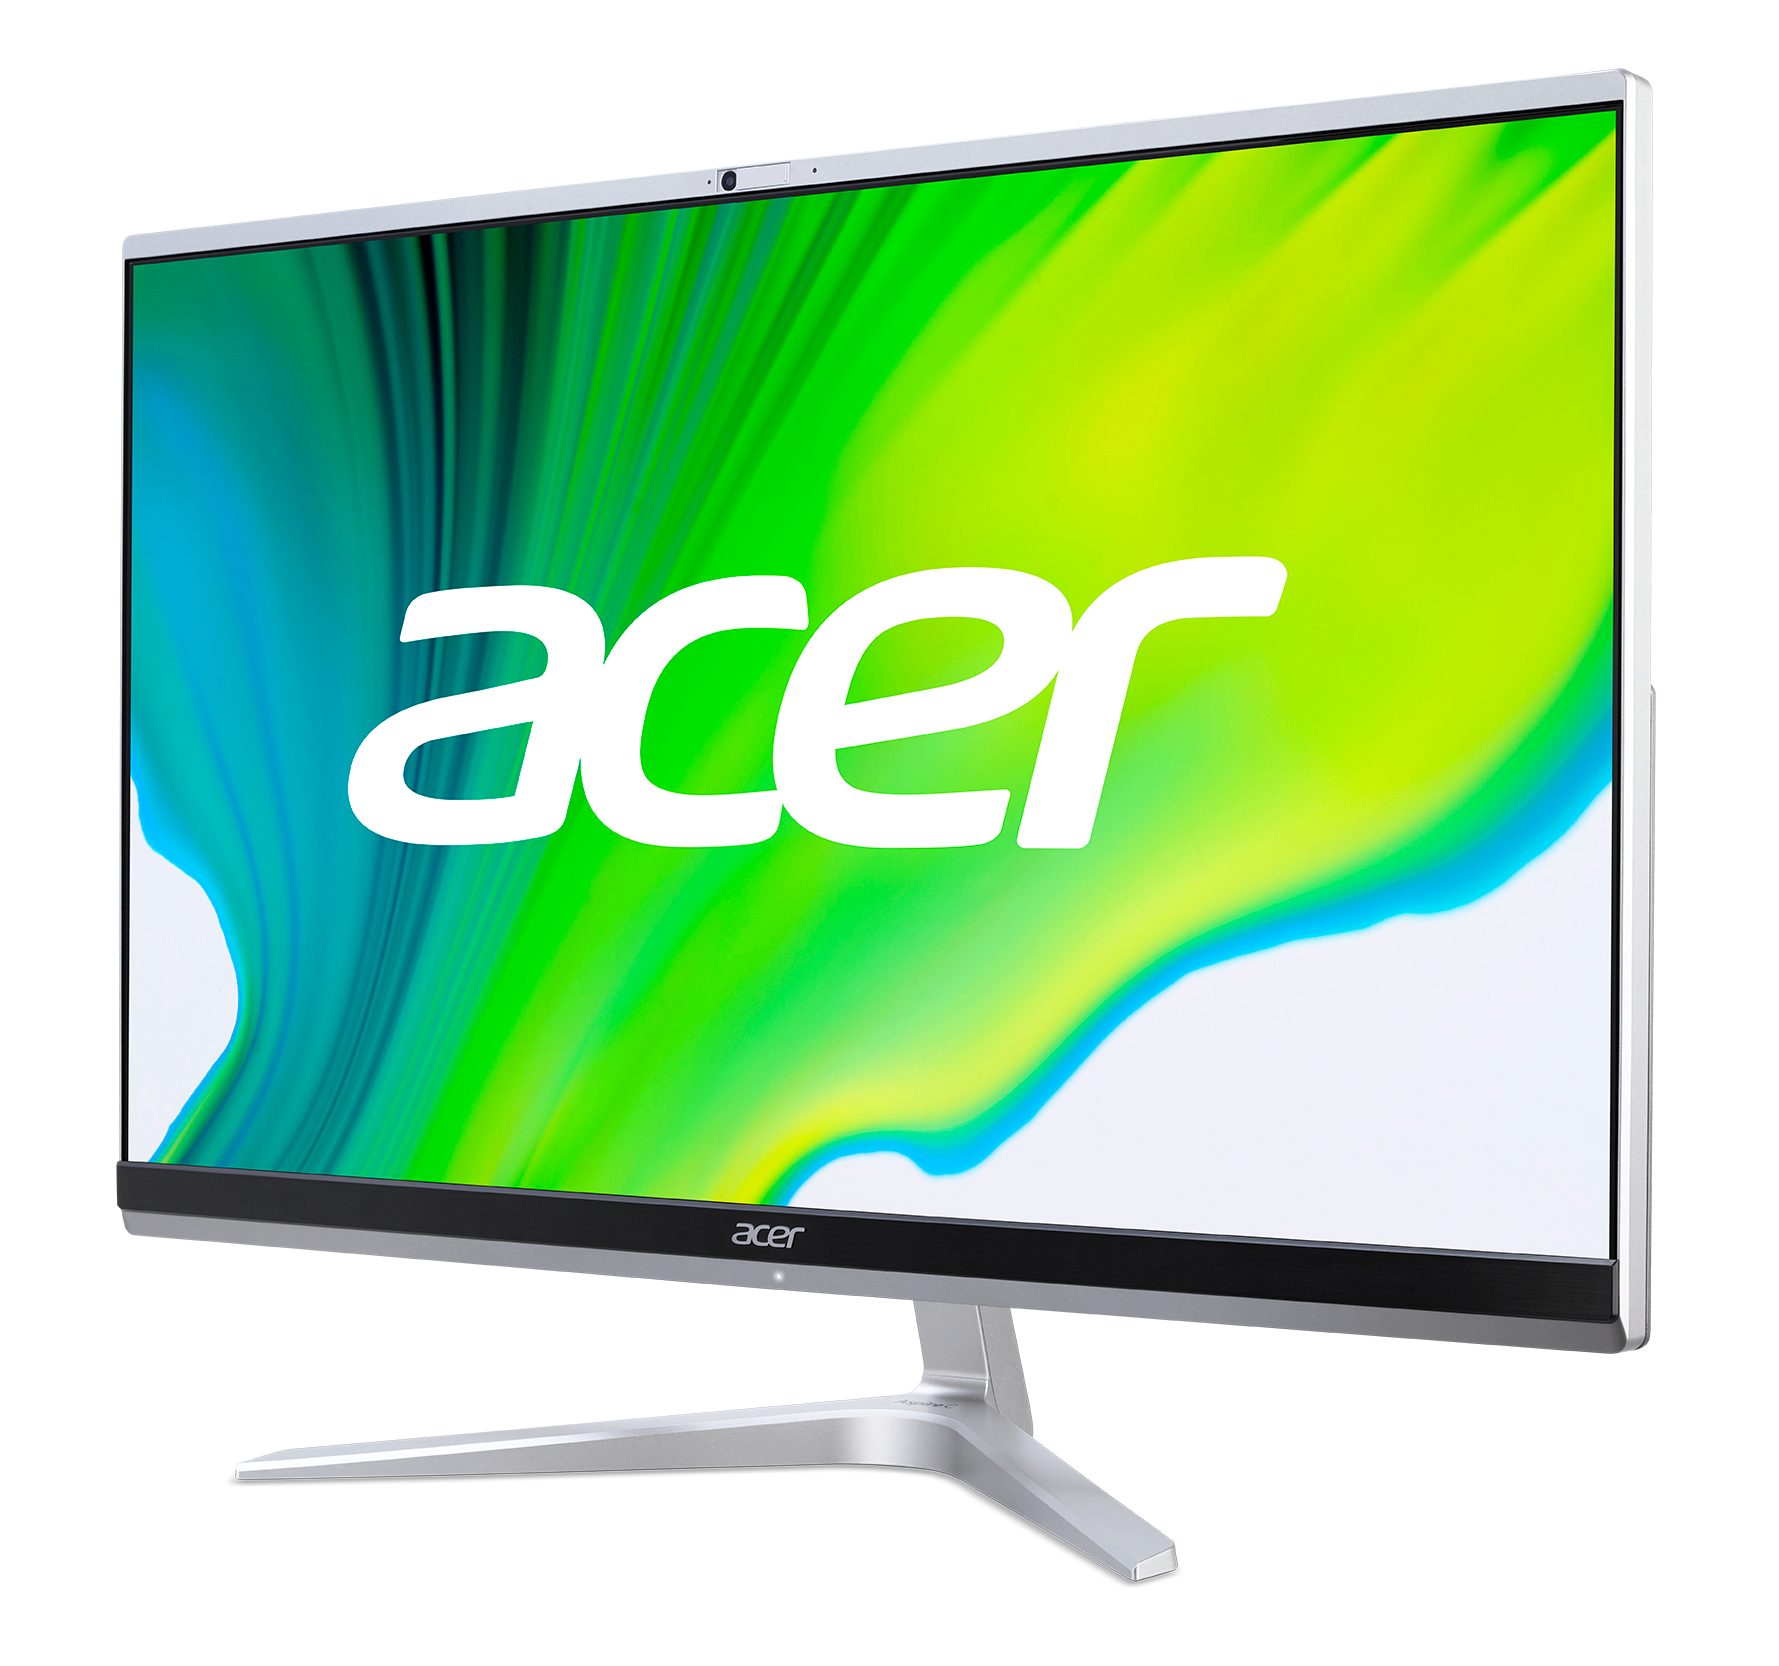 Acer Aspire C24-1650 All-in-One PC, 23.8i FHD, i5-1135G7, 8GB DDR4,- 256GB PCIe NVMe SSD + 1TB HDD, IrisXe Graphics - QWERTY - Windows11 Home